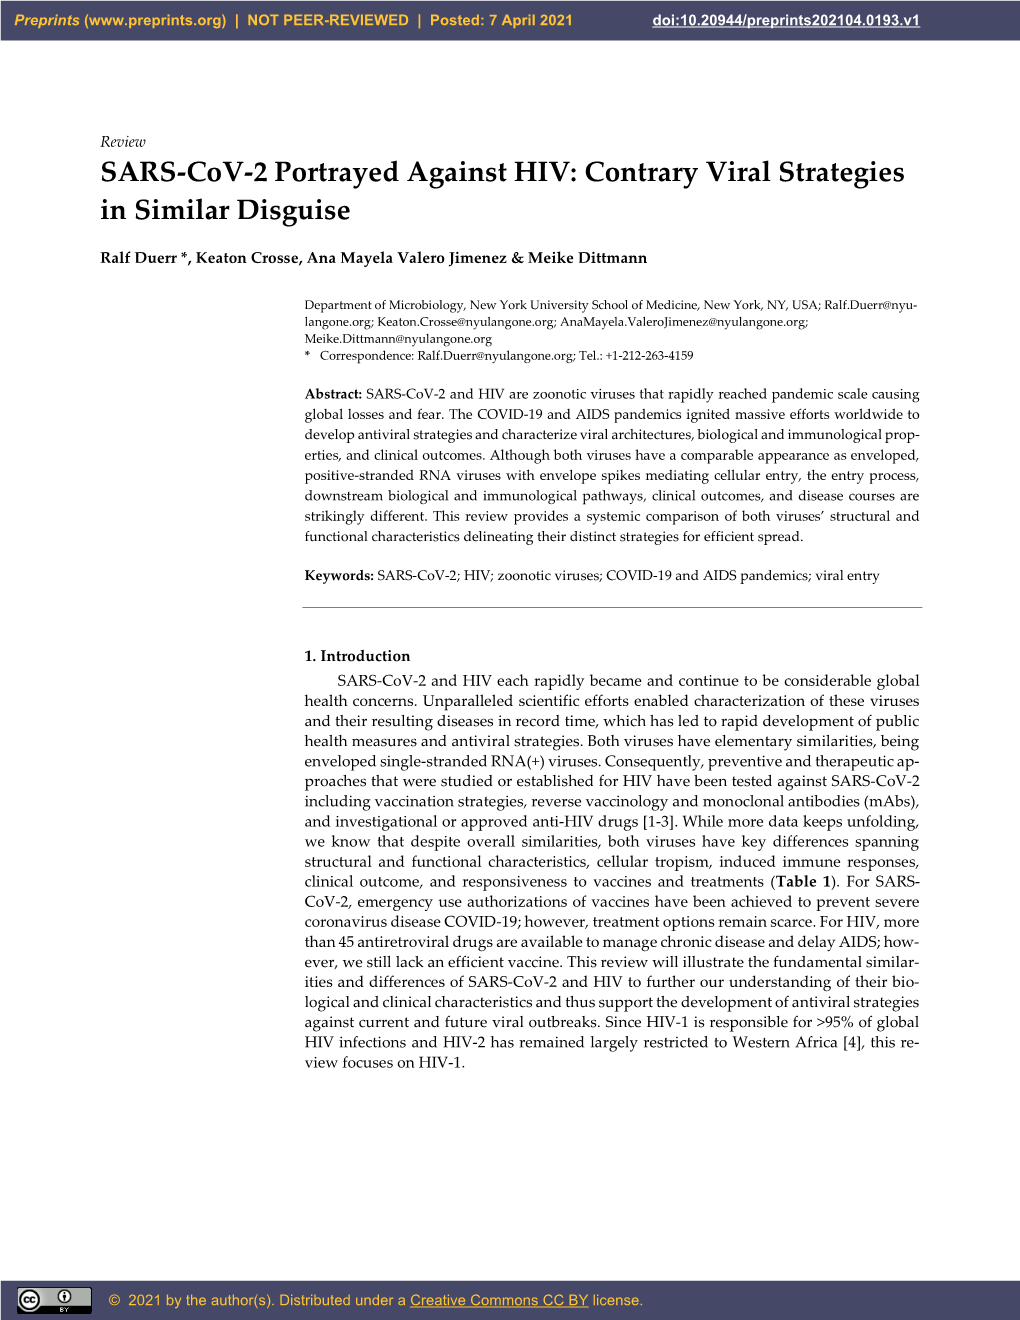 SARS-Cov-2 Portrayed Against HIV: Contrary Viral Strategies in Similar Disguise